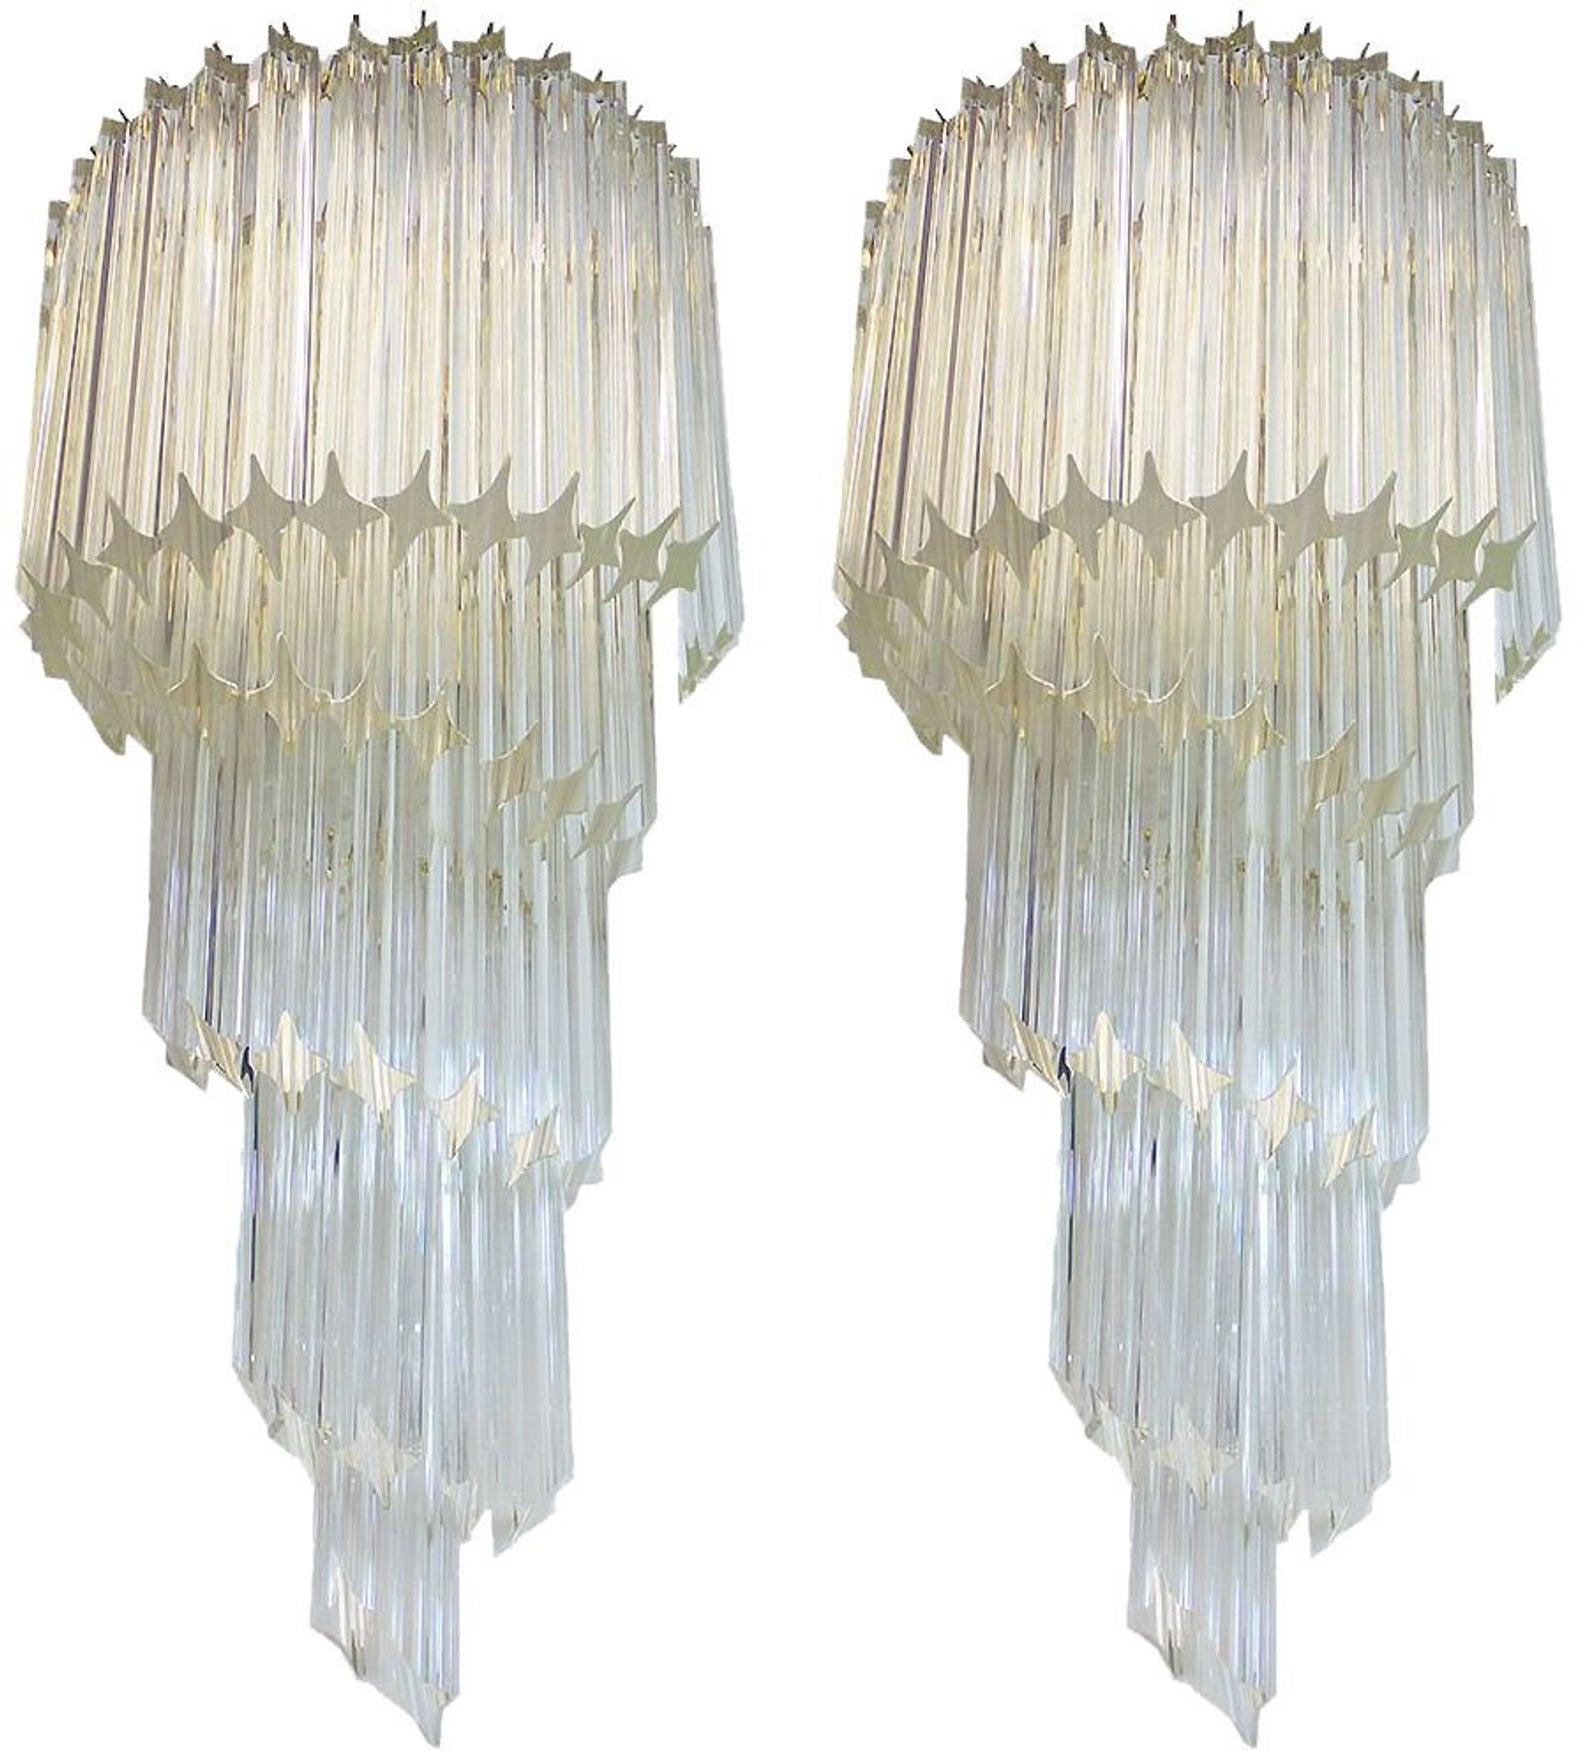 Set of four monumental clear crystal sconces, Italy, 1970s. Price is for a set of four.
There are 3 pairs available in total.
A single pair can be purchased.
These are made to impress and that they do.

These are located in our warehouse in